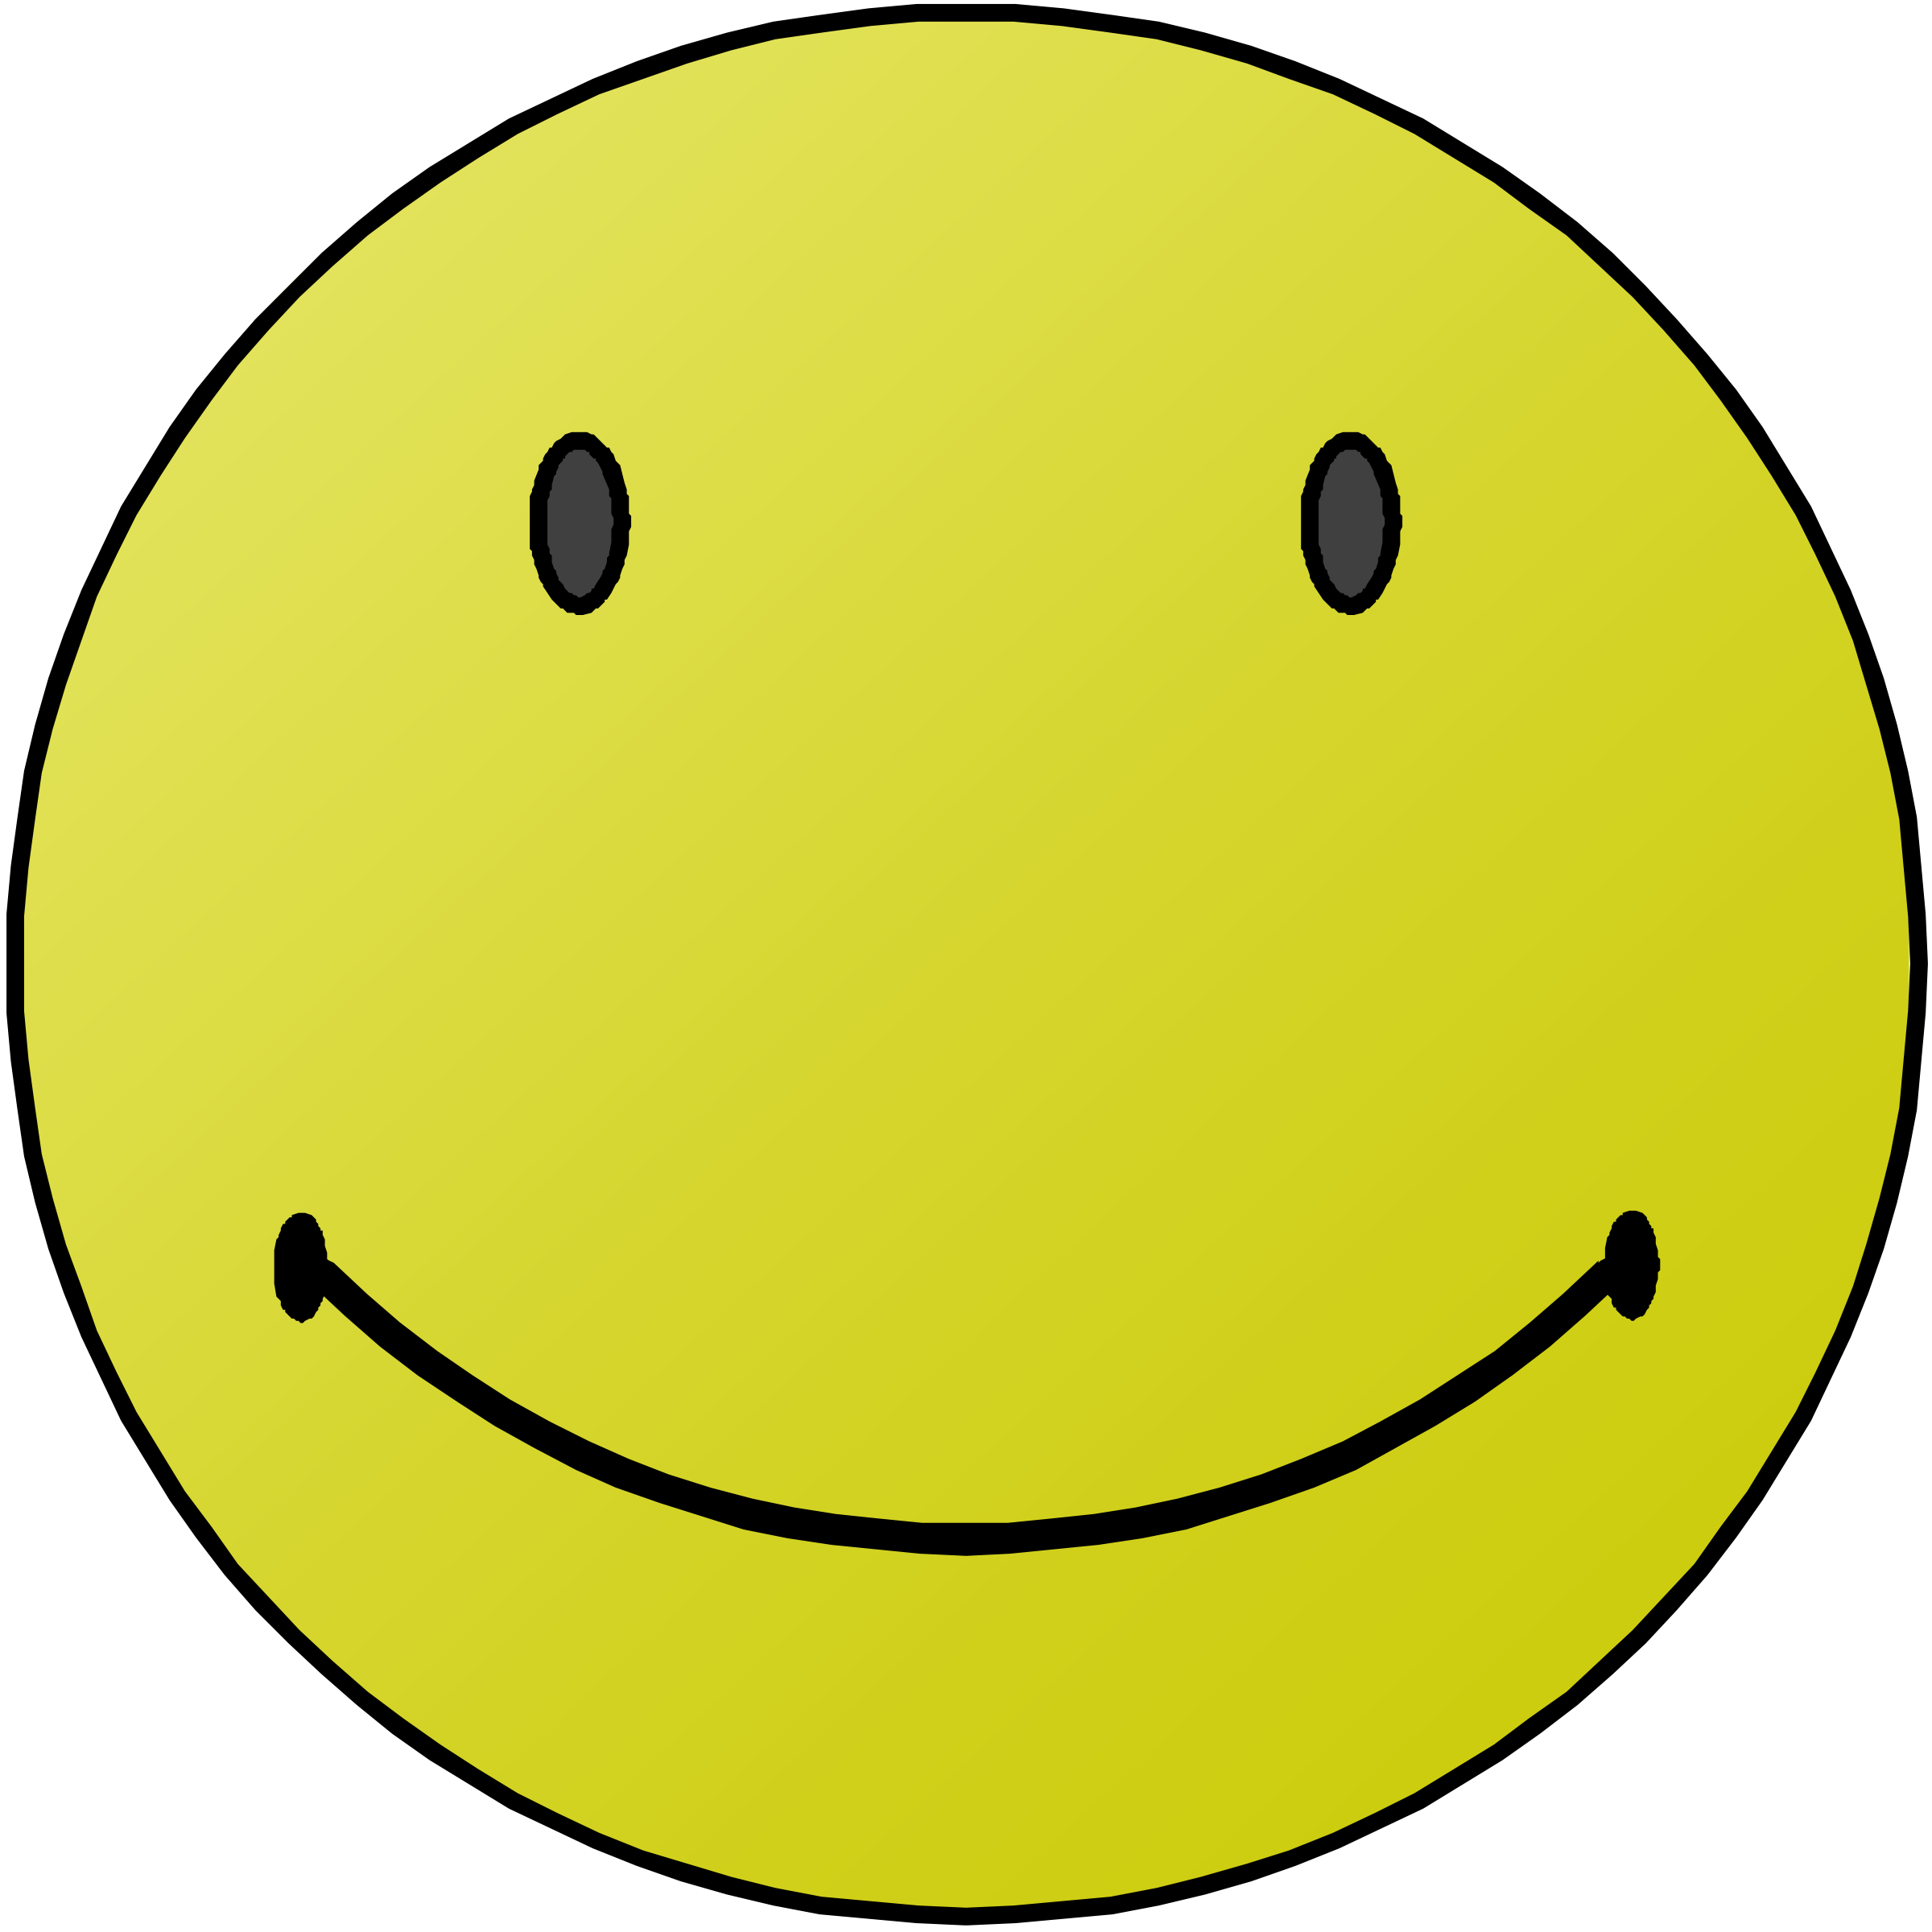 Happy Face Clip Art For Free | Clipart library - Free Clipart Images